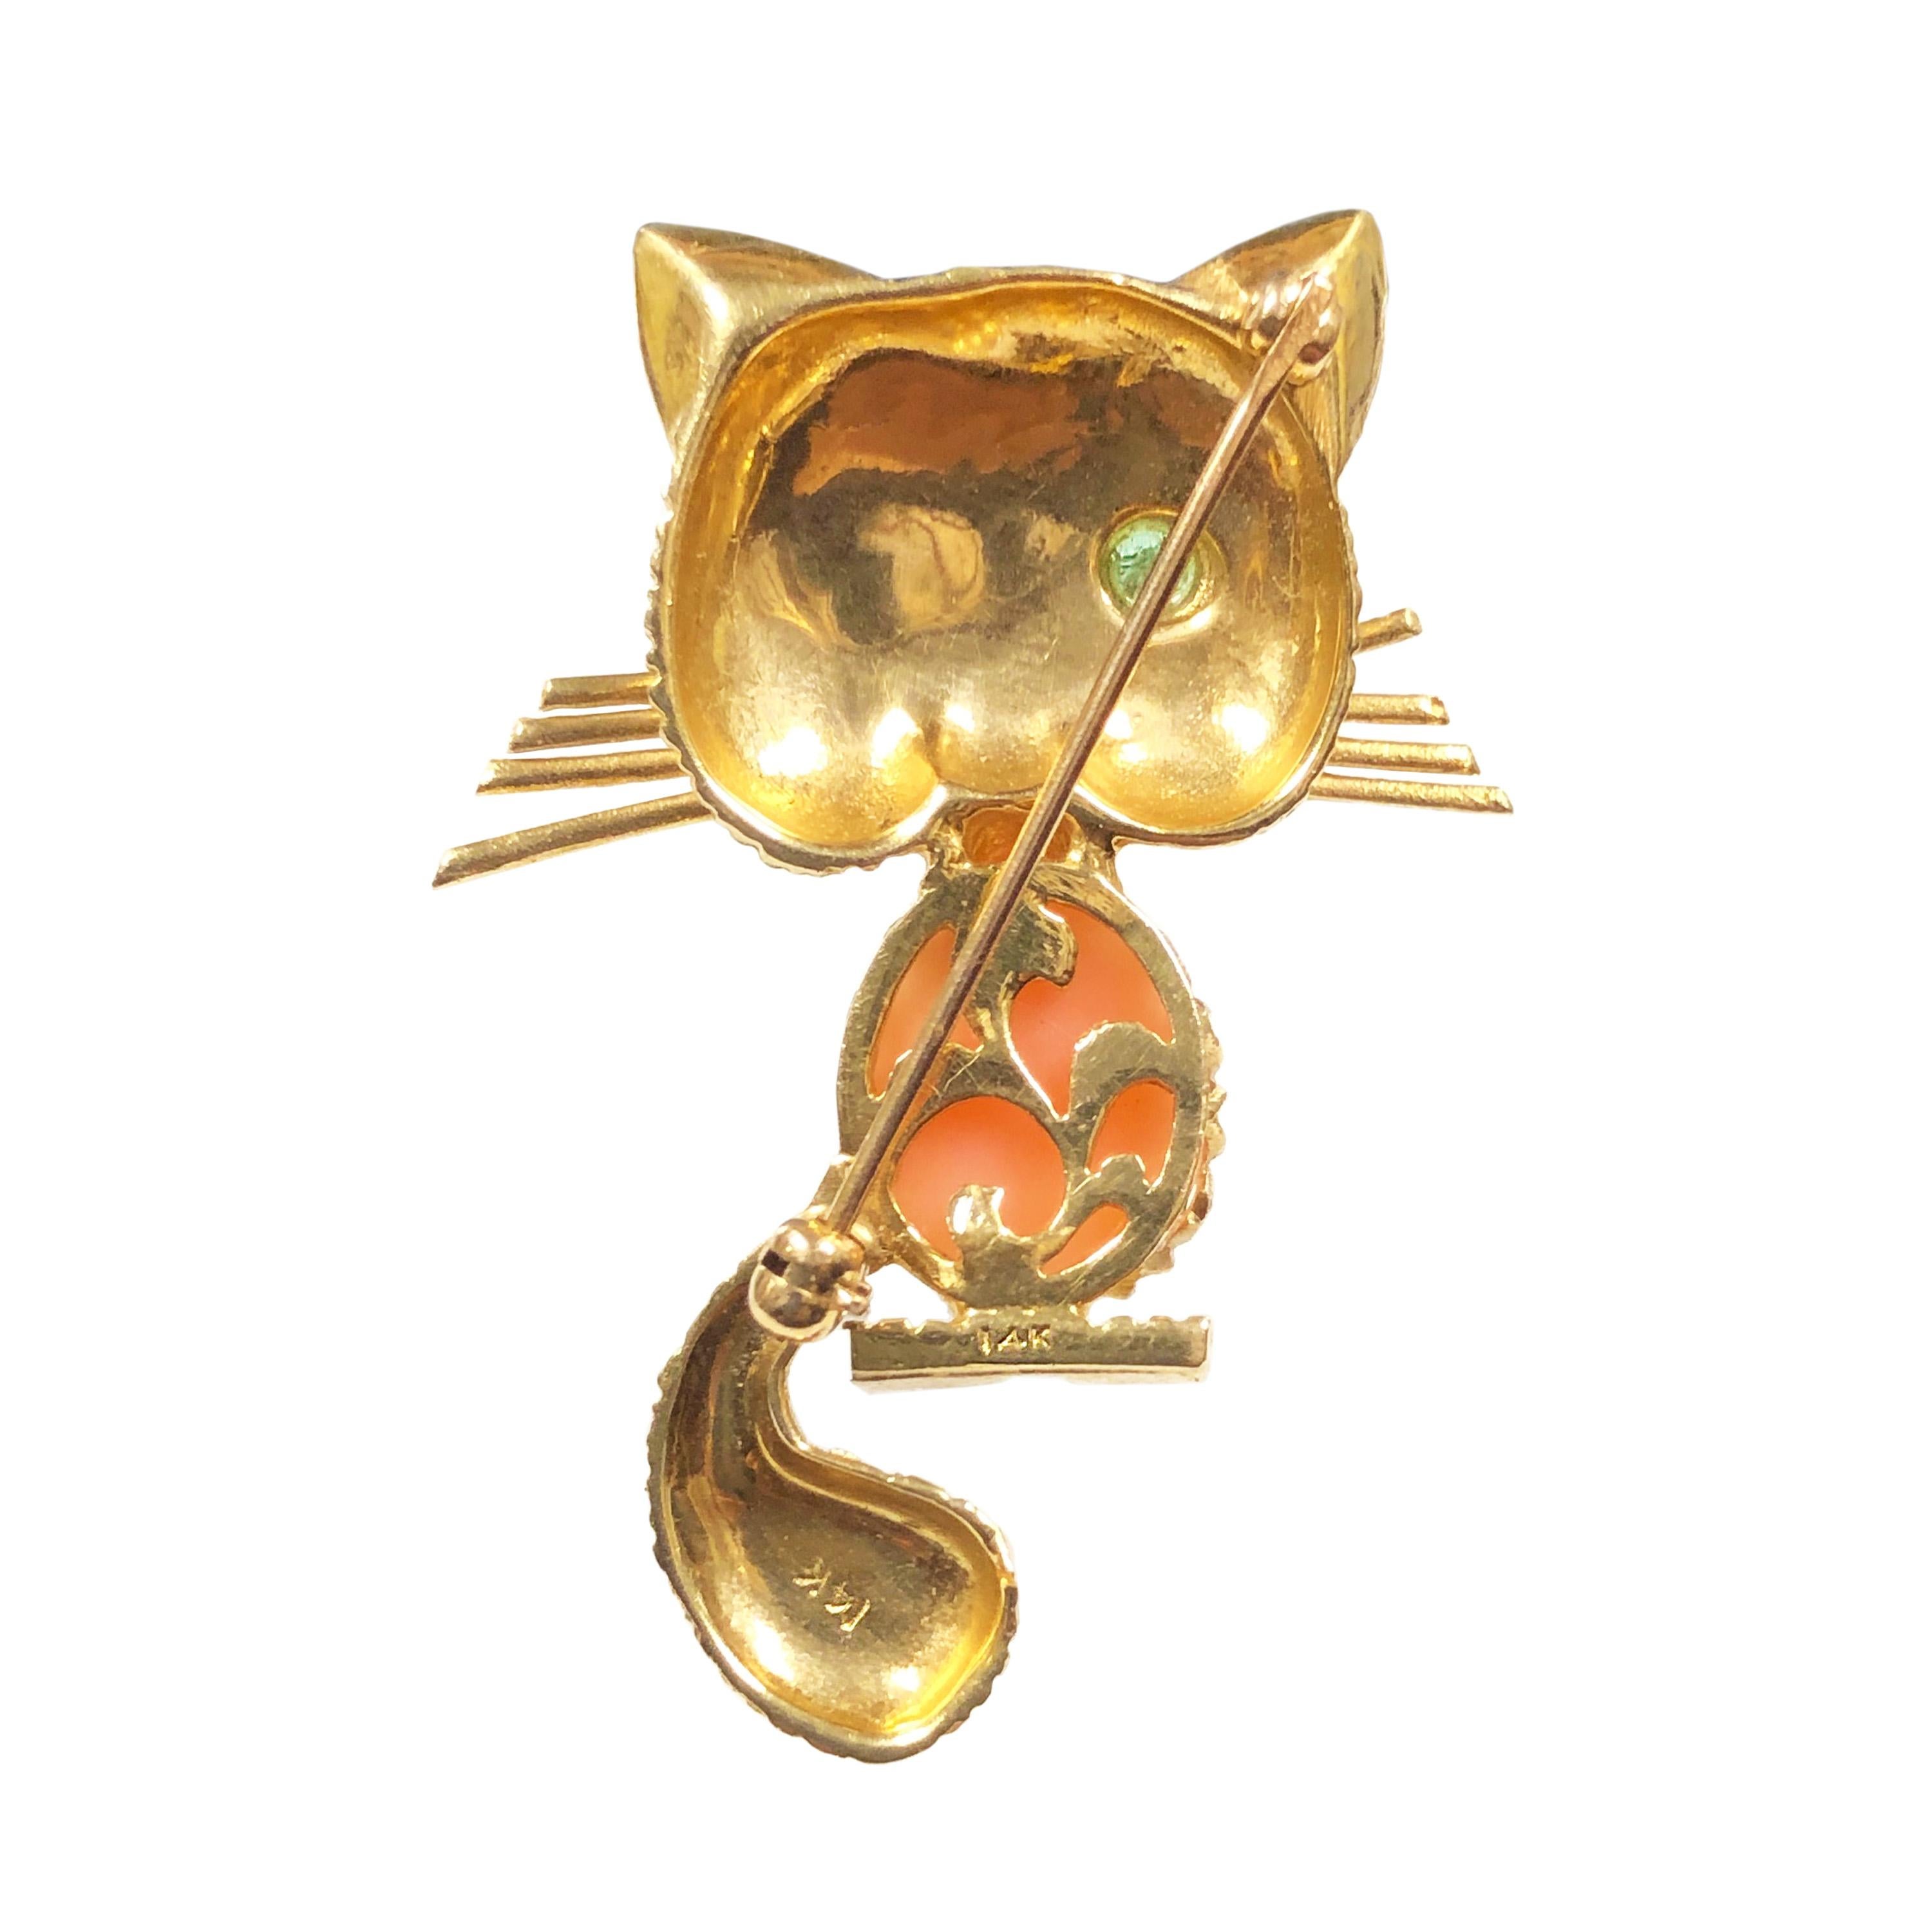 Circa 1960s copy of the famous VCA winking Kitty Brooch, 14k Yellow Gold and measuring 1 3/4 inches in length x 1 1/8 inch wide, centrally set with a Coral and an Emerald in the Eye. Nicely detailed and looks exactly like the Van Cleef counterpart.